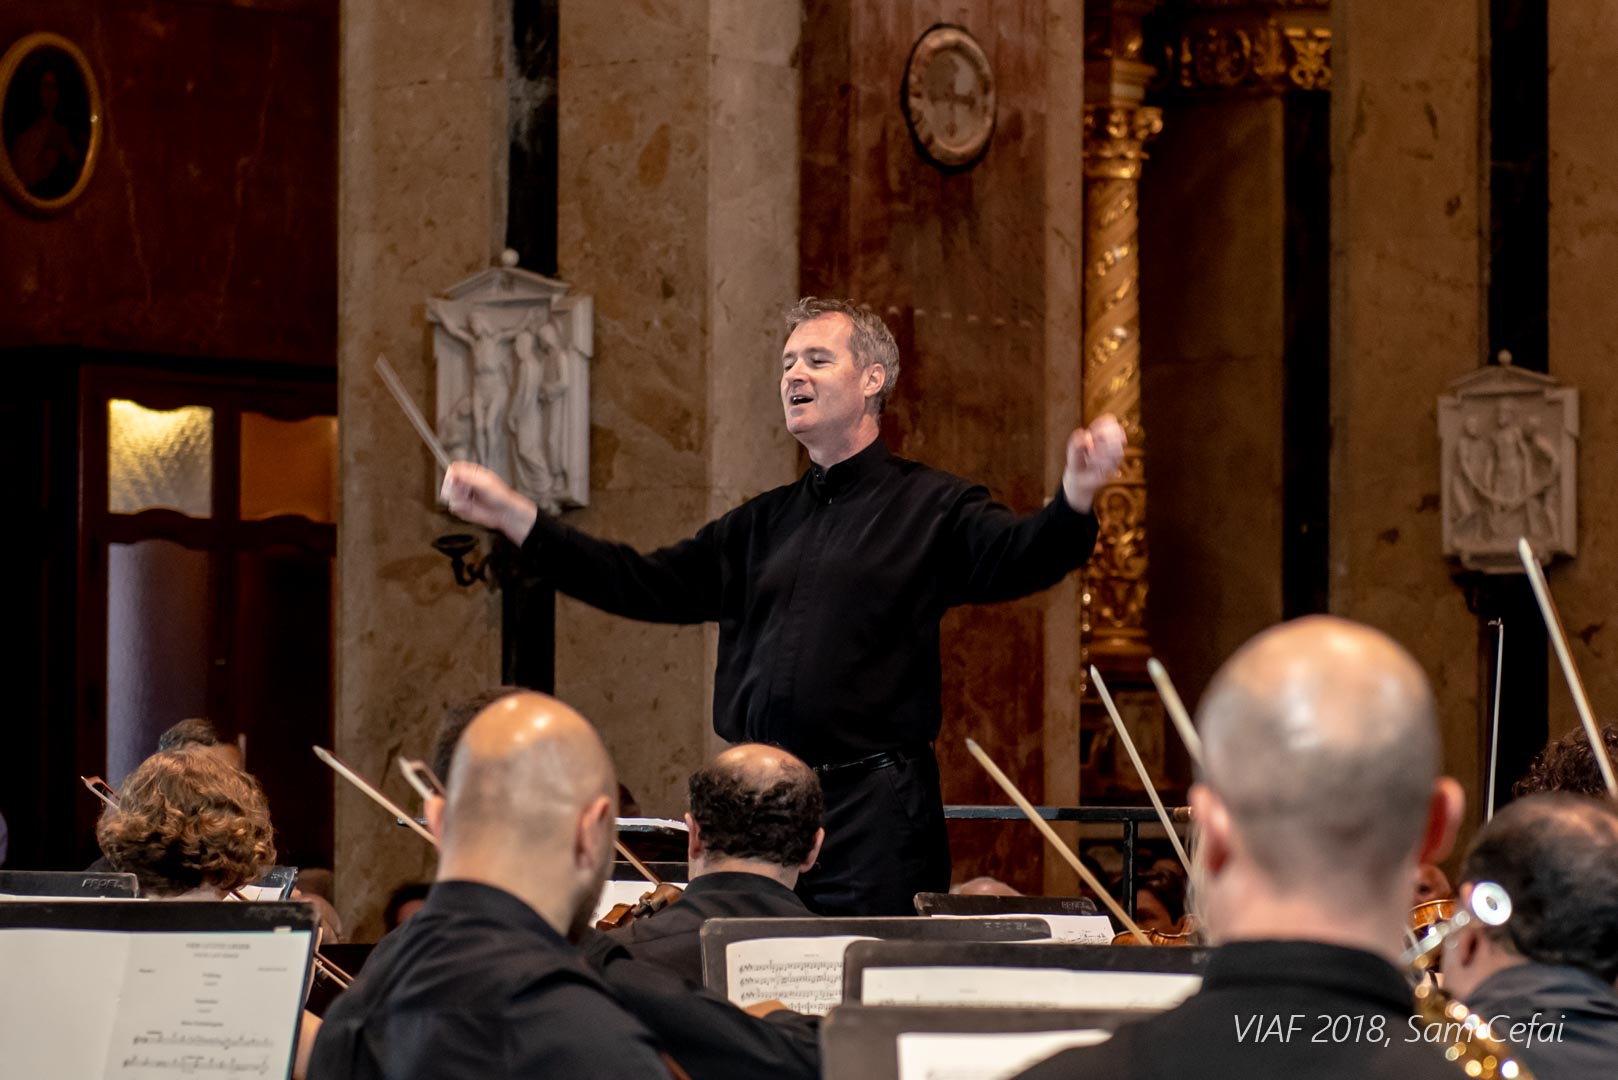 conductor philip walsh will be conducting a classical music event in Malta